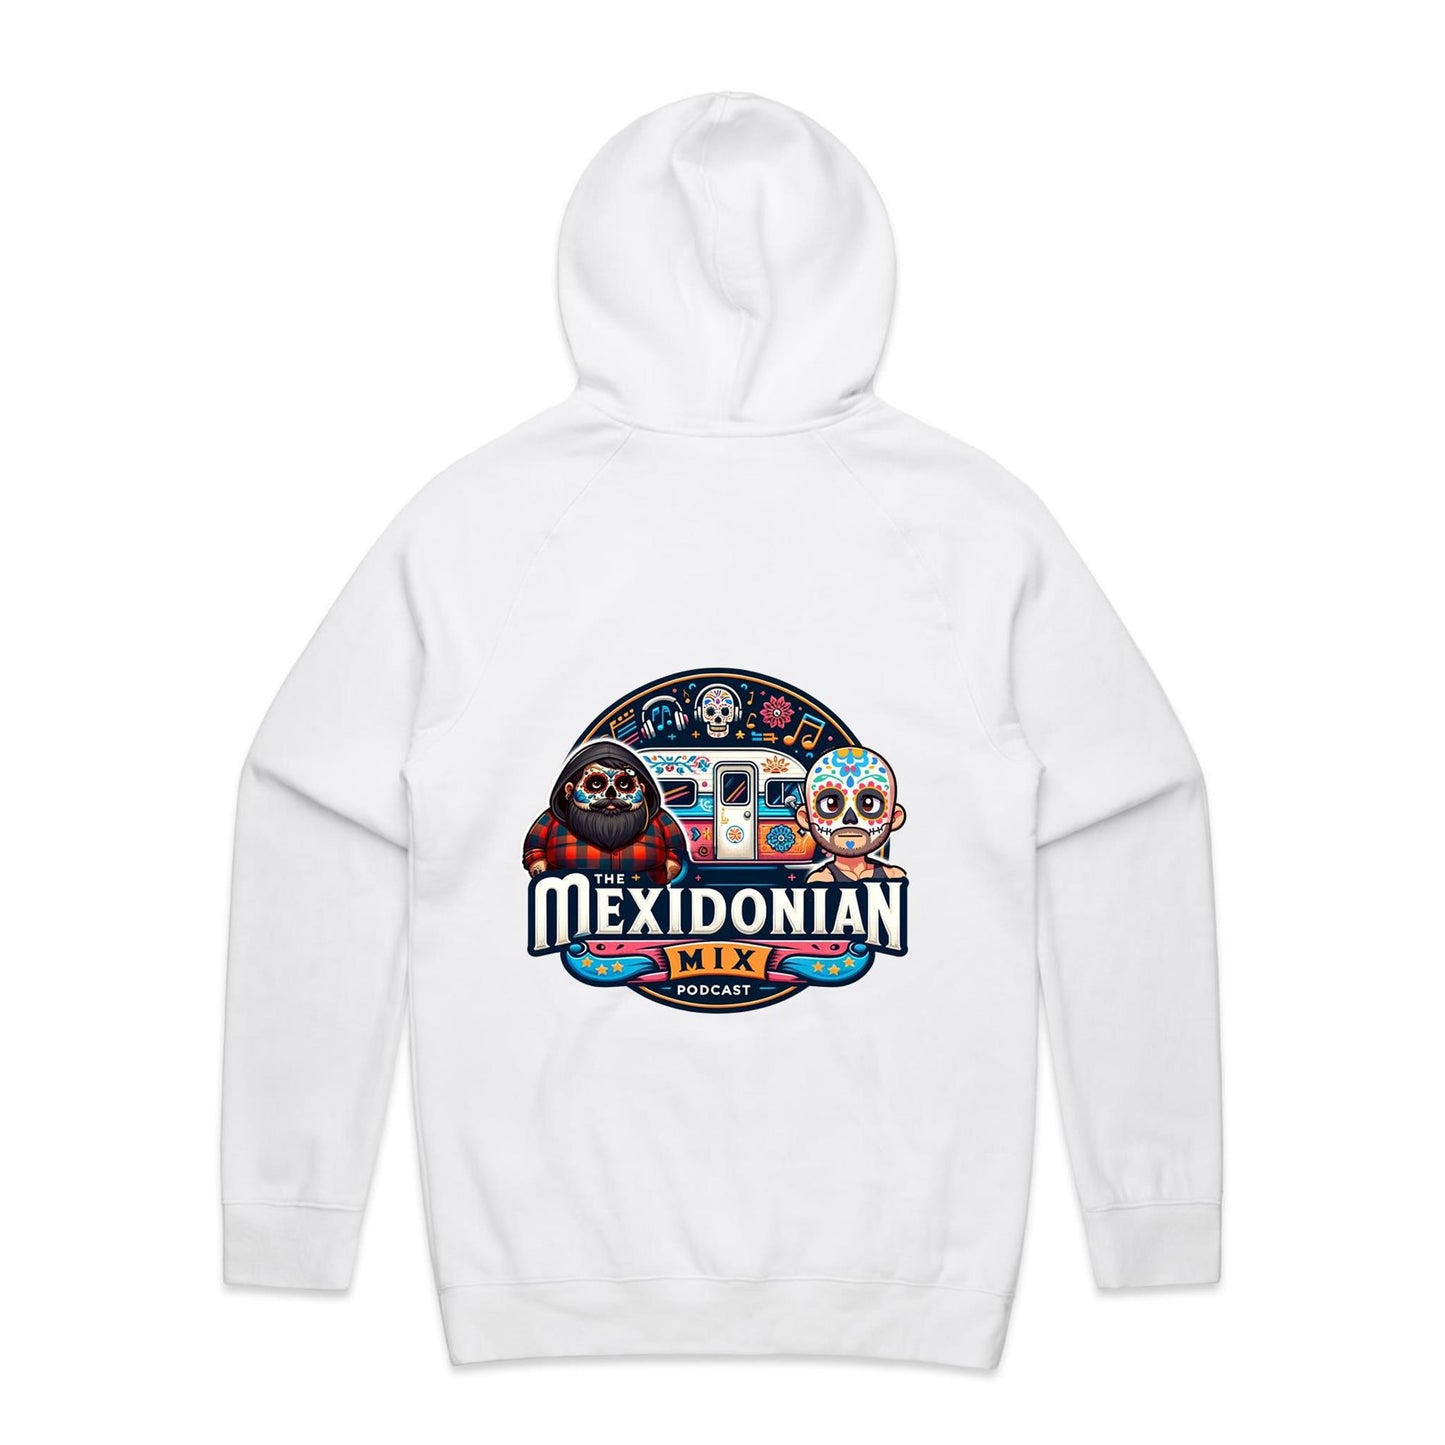 The Mexidonian Mix Podcast Hoodie - AS Colour - Supply Hood